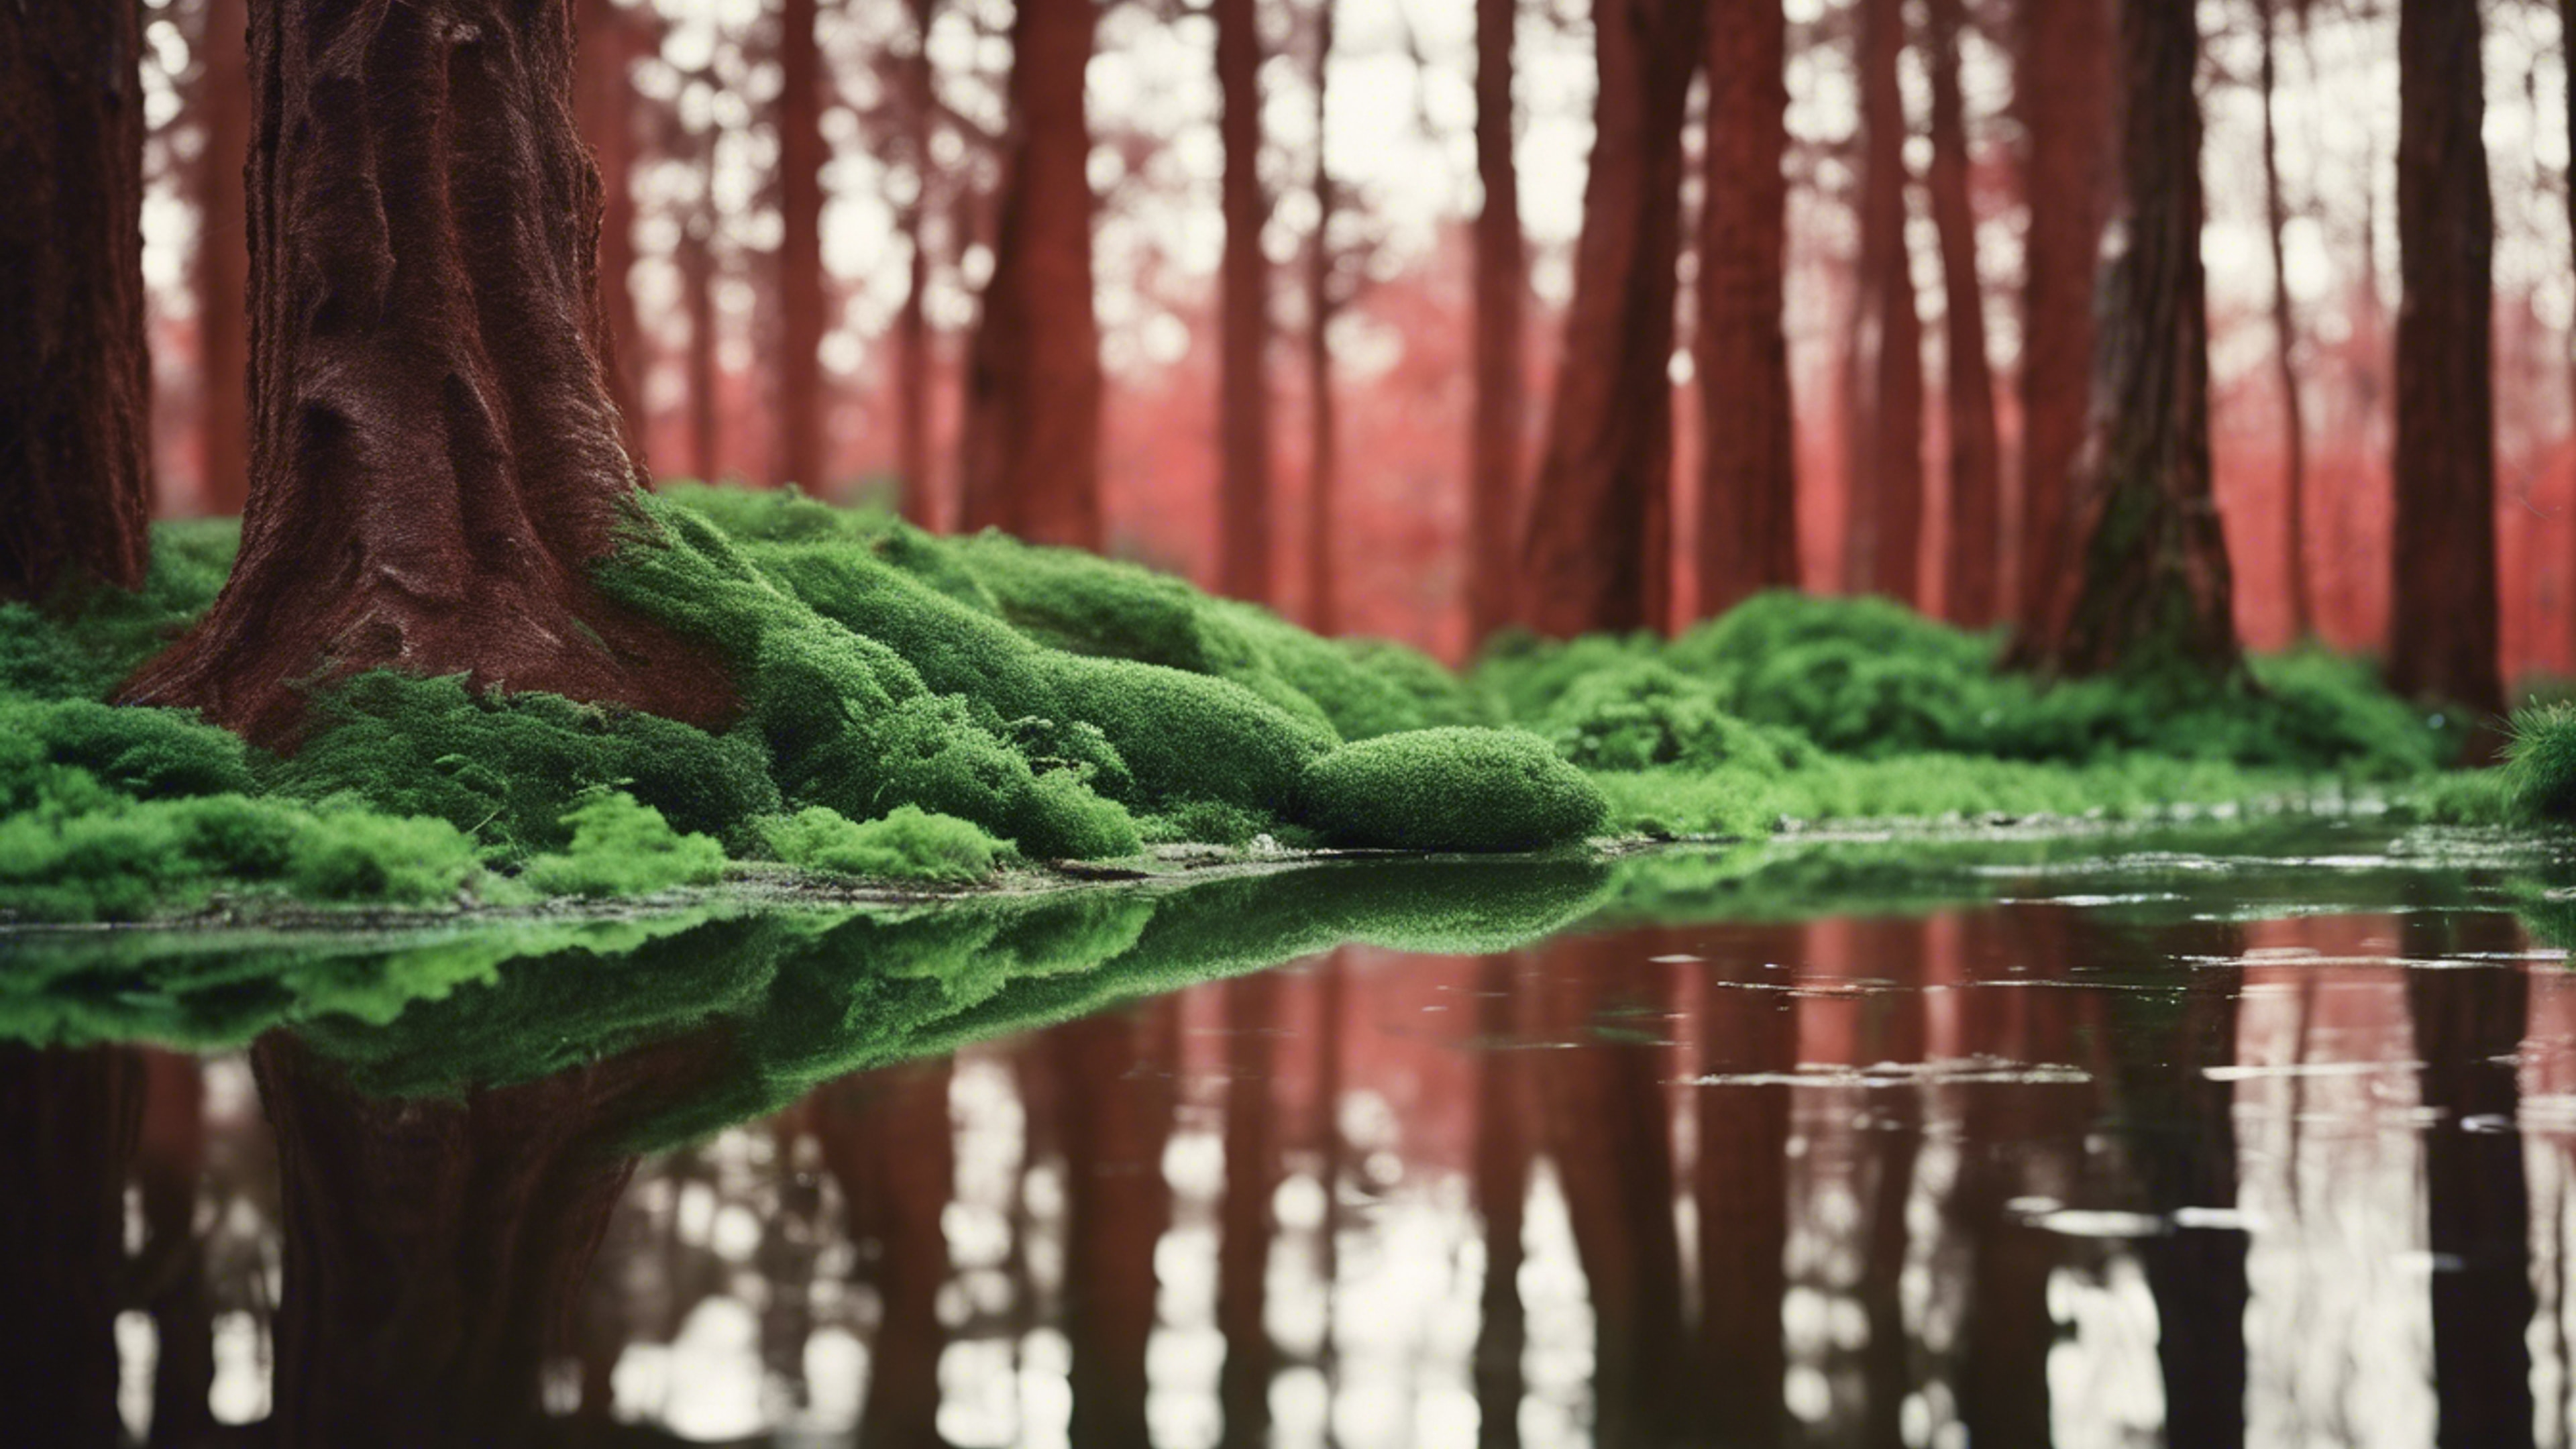 Lush, green forest reflections on a shiny, red leather surface. Wallpaper[6f4e1618f75b40719461]